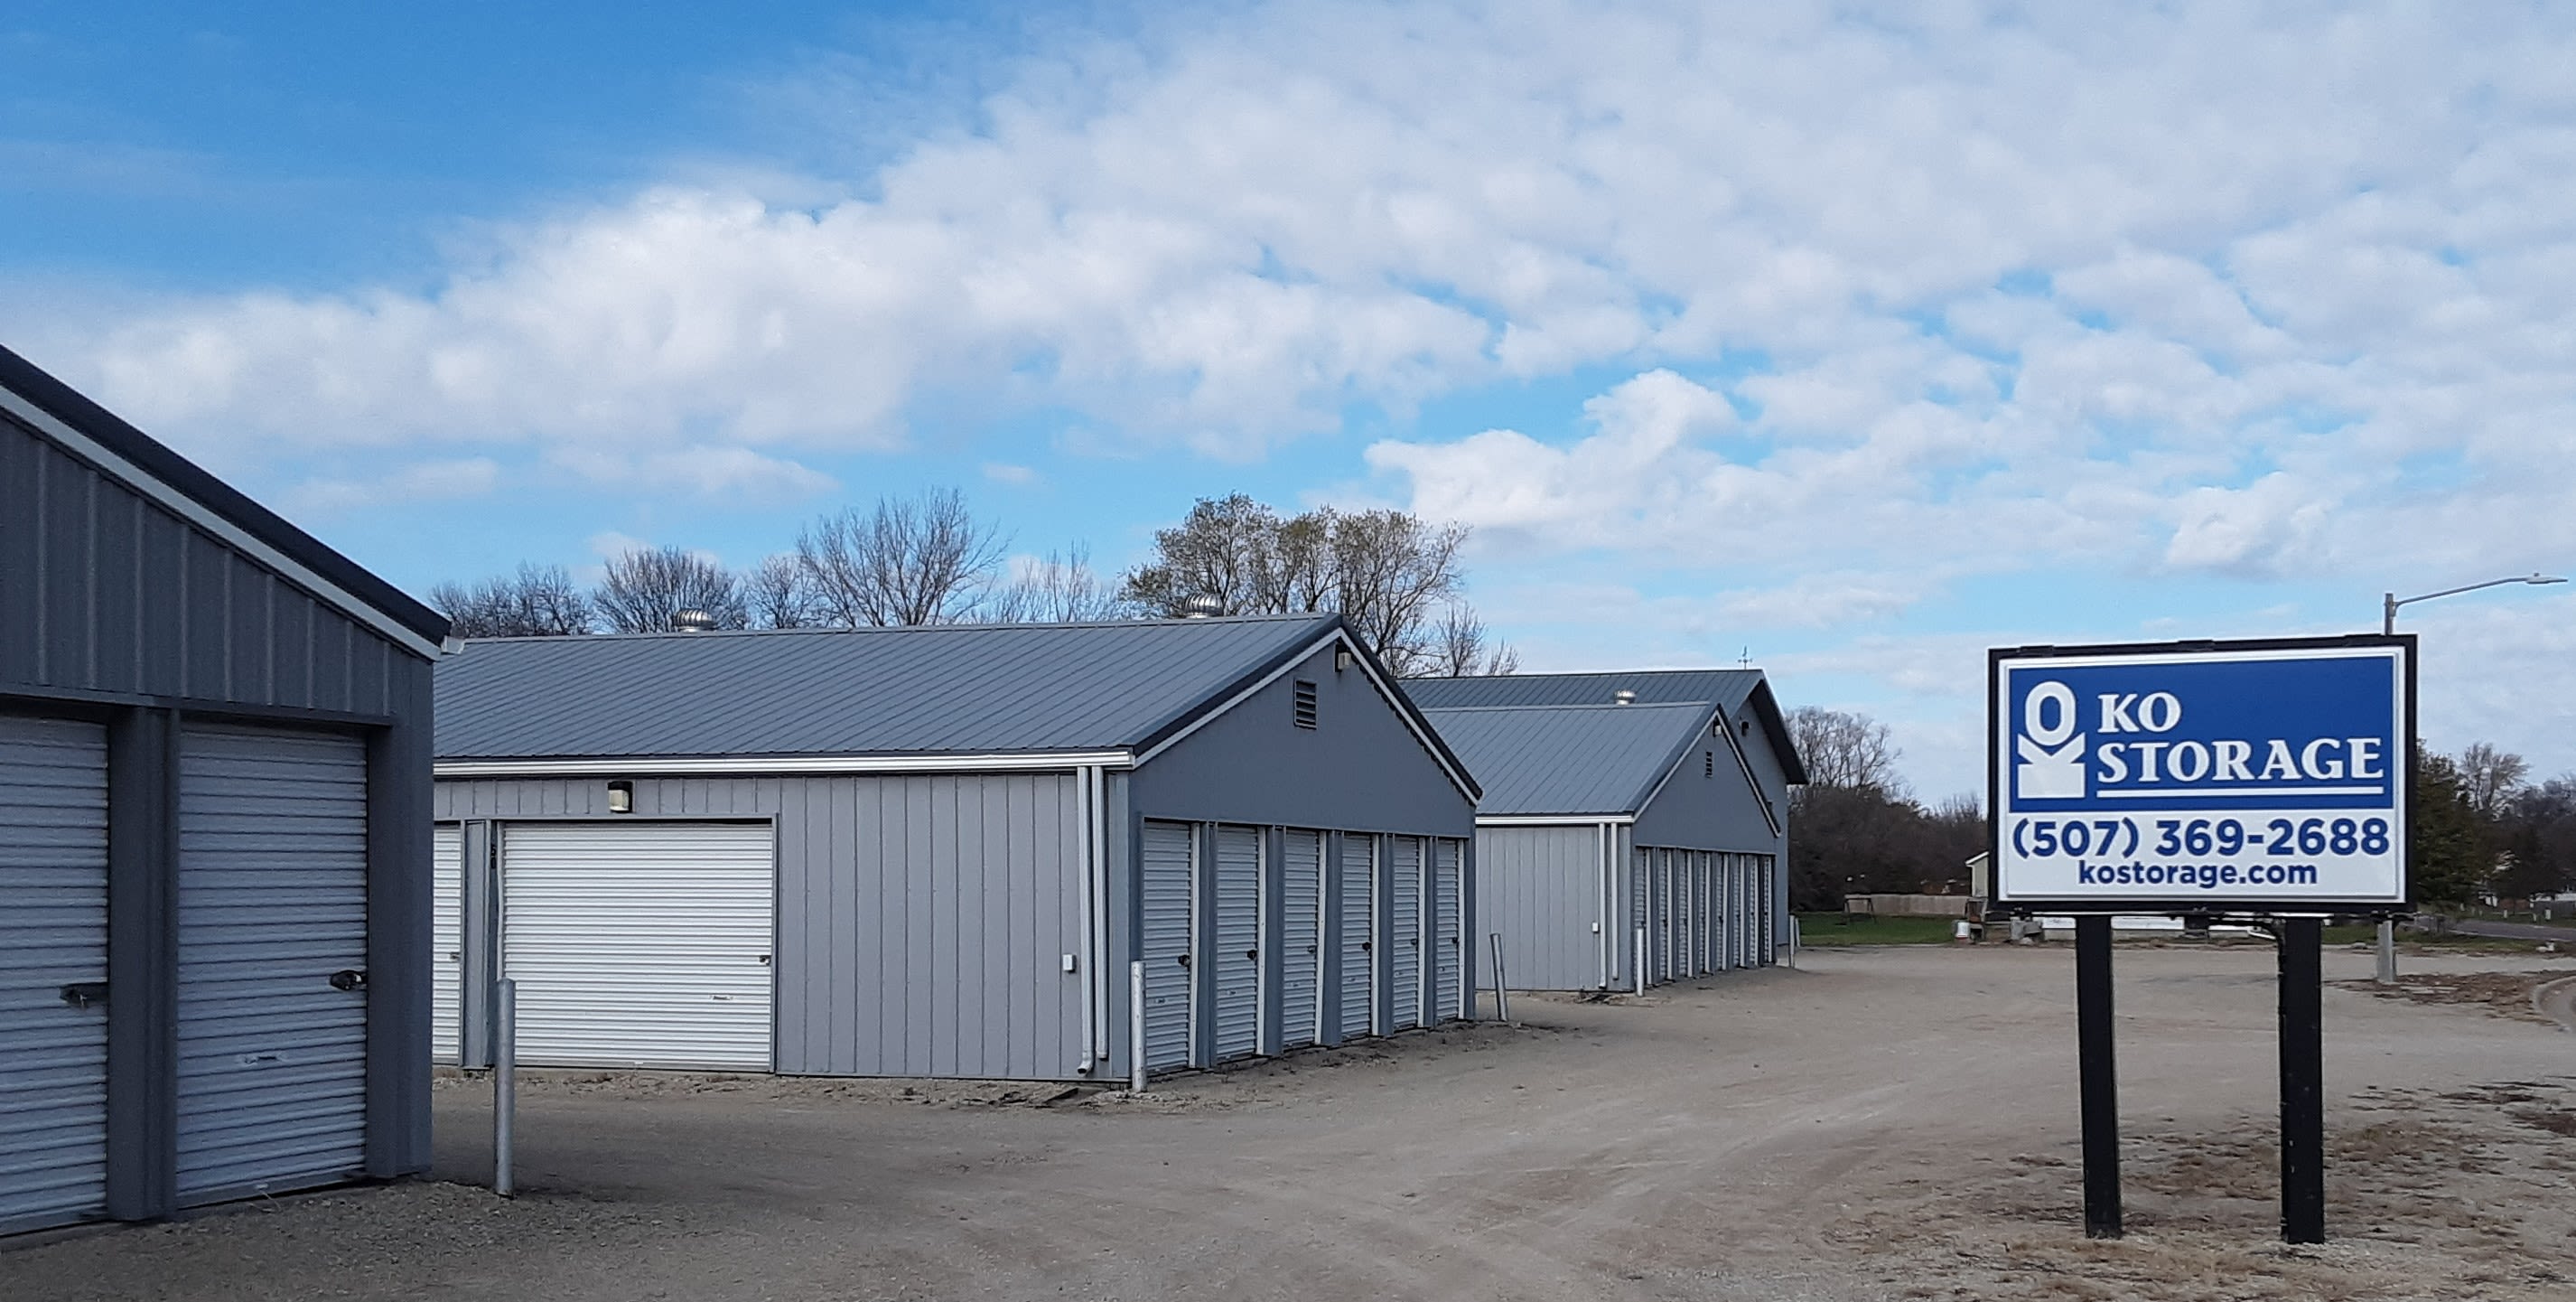 Unit sizes and prices at KO Storage in Waseca, Minnesota